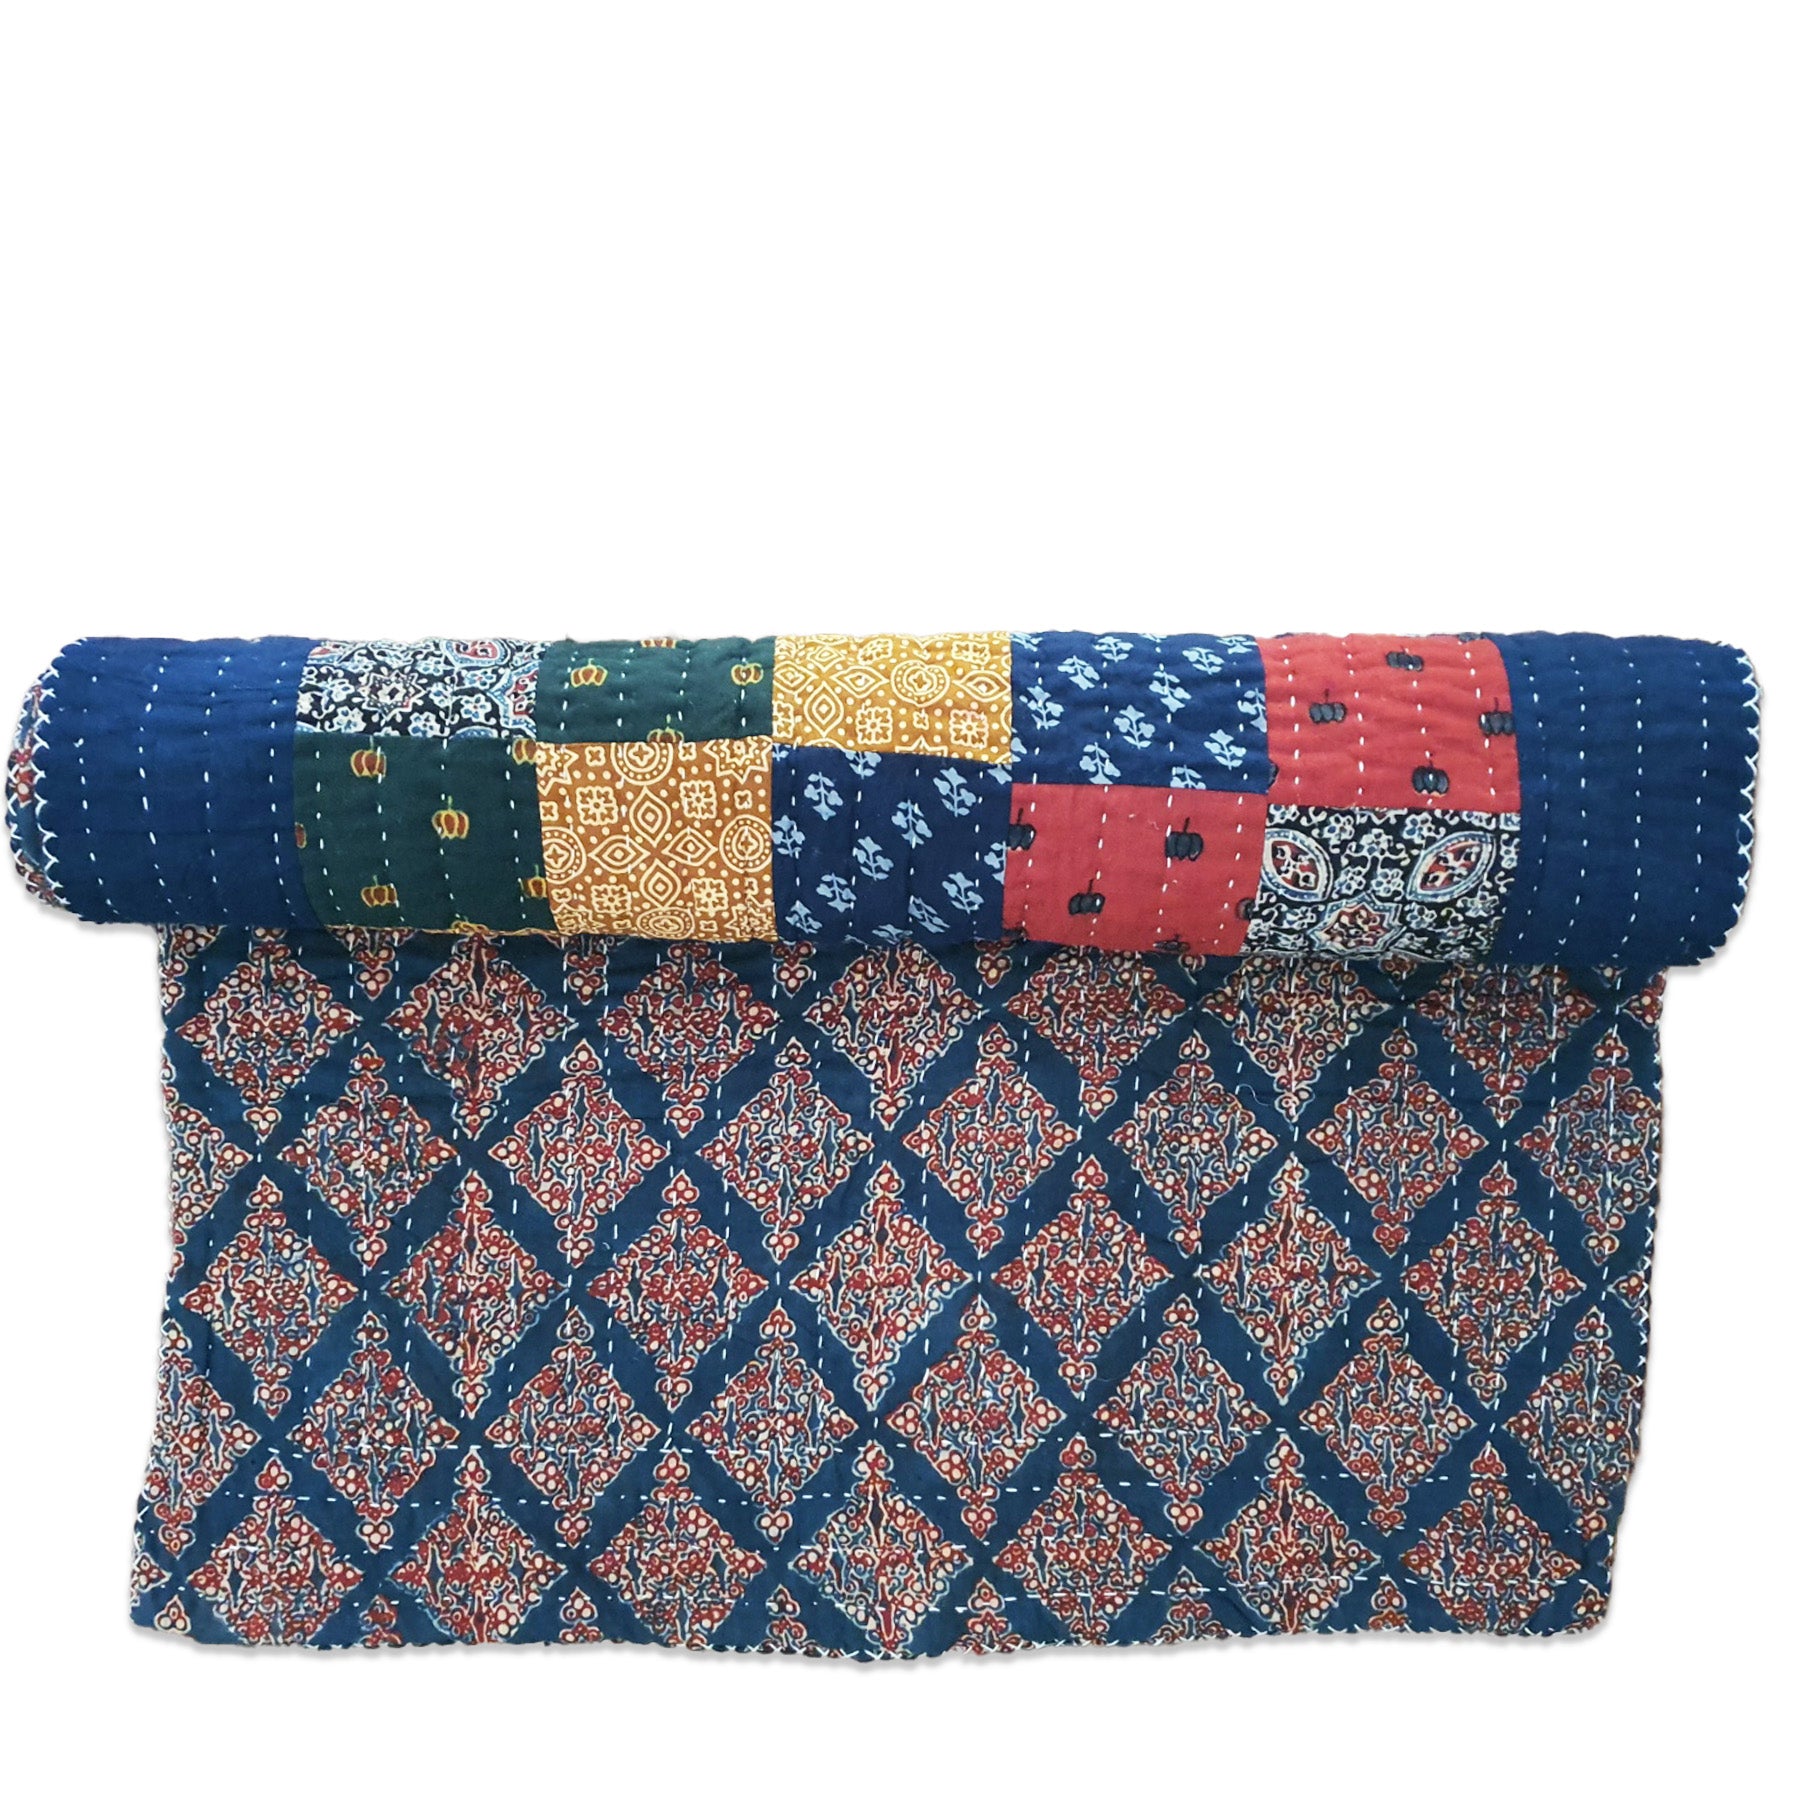 Most Exquisite Handcrafted Cotton Yoga Mats in Town